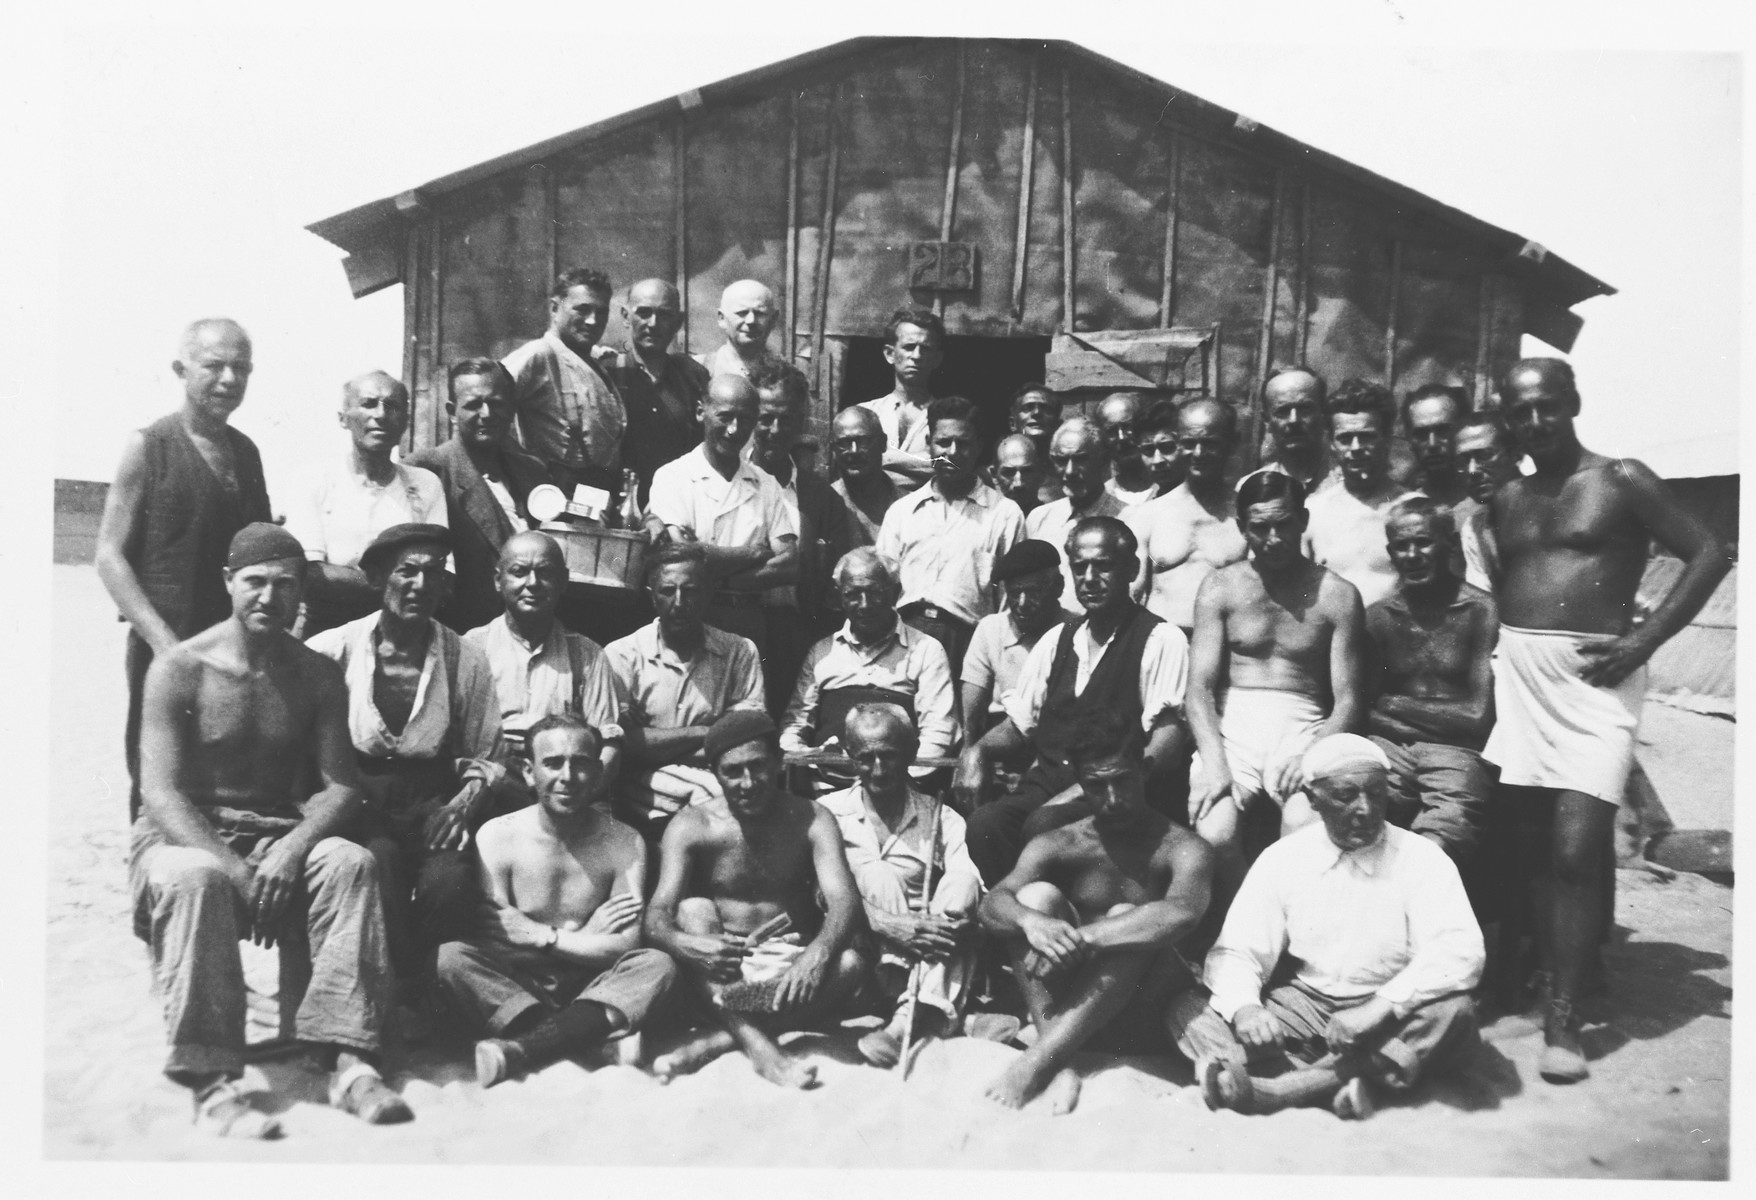 Group portrait of prisoners in front of a barracks in the Gurs transit camp.